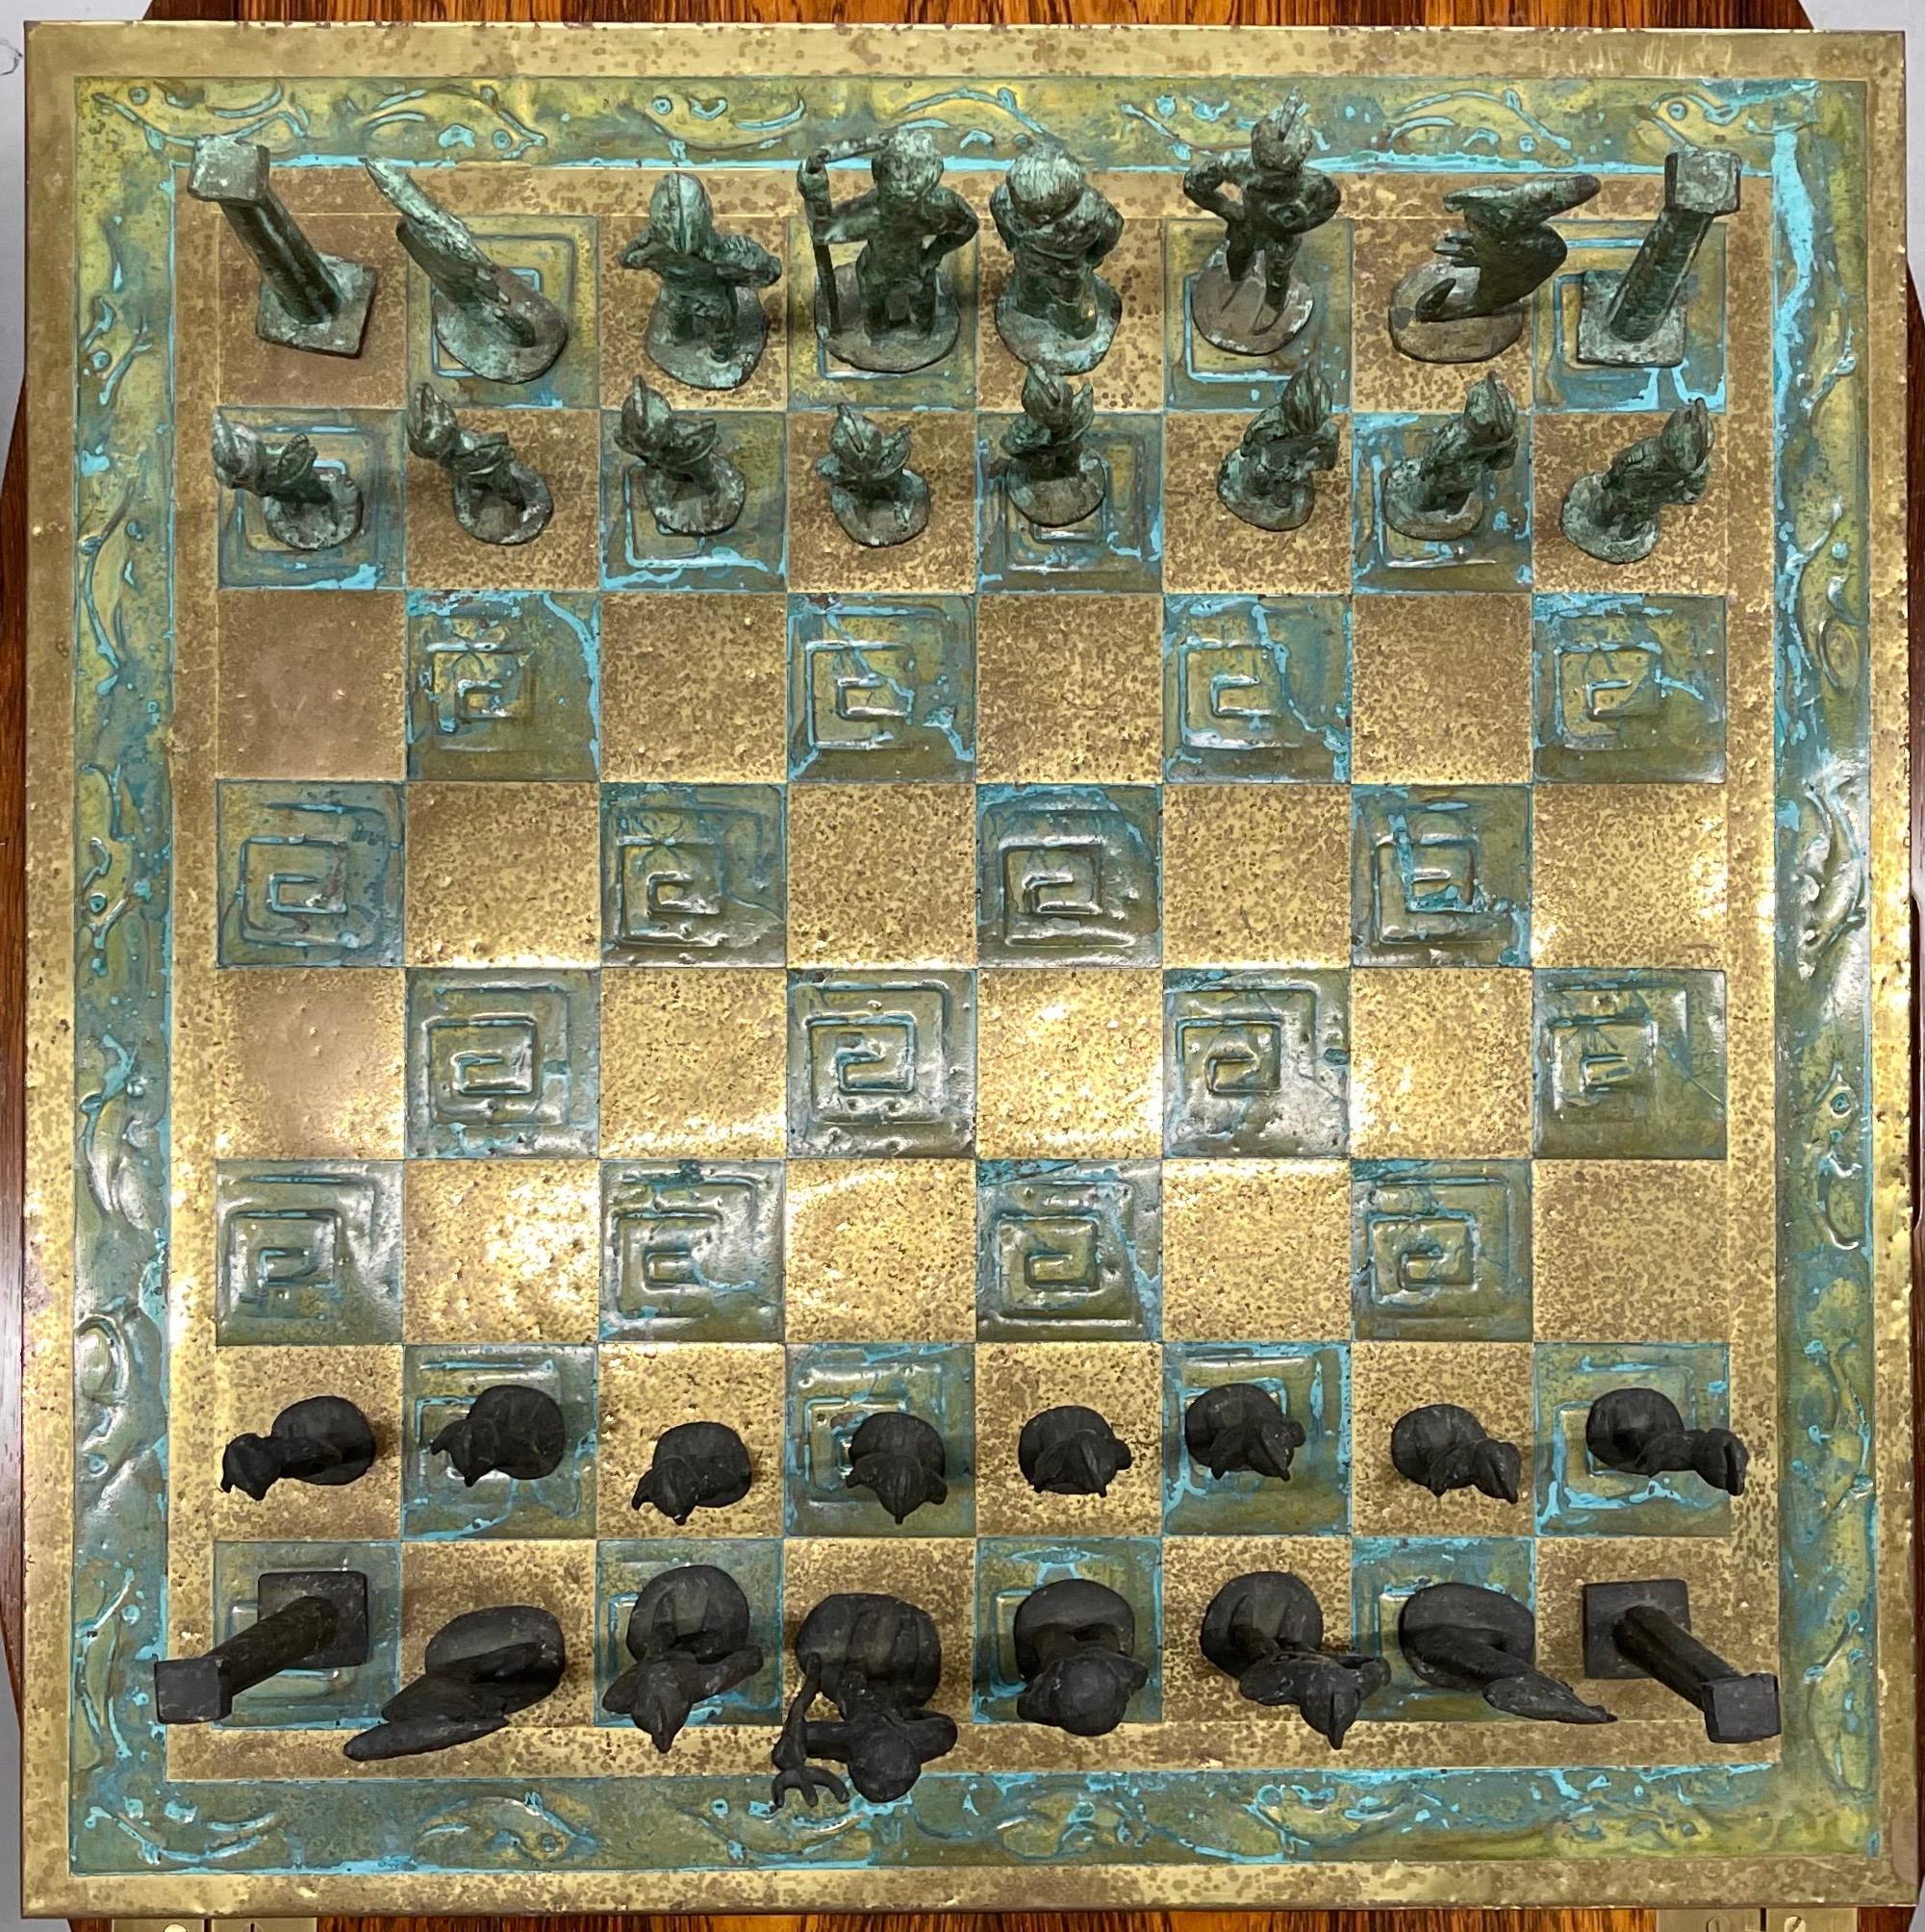 Stunning mid-century bronze chess set with a neo-classical motif in a brutalist style. Not sure who designed this but it is quite unique. The king is approx 6.5 inches tall and the pwns are 3.88 inches tall. The board is 21.75 inches square and is